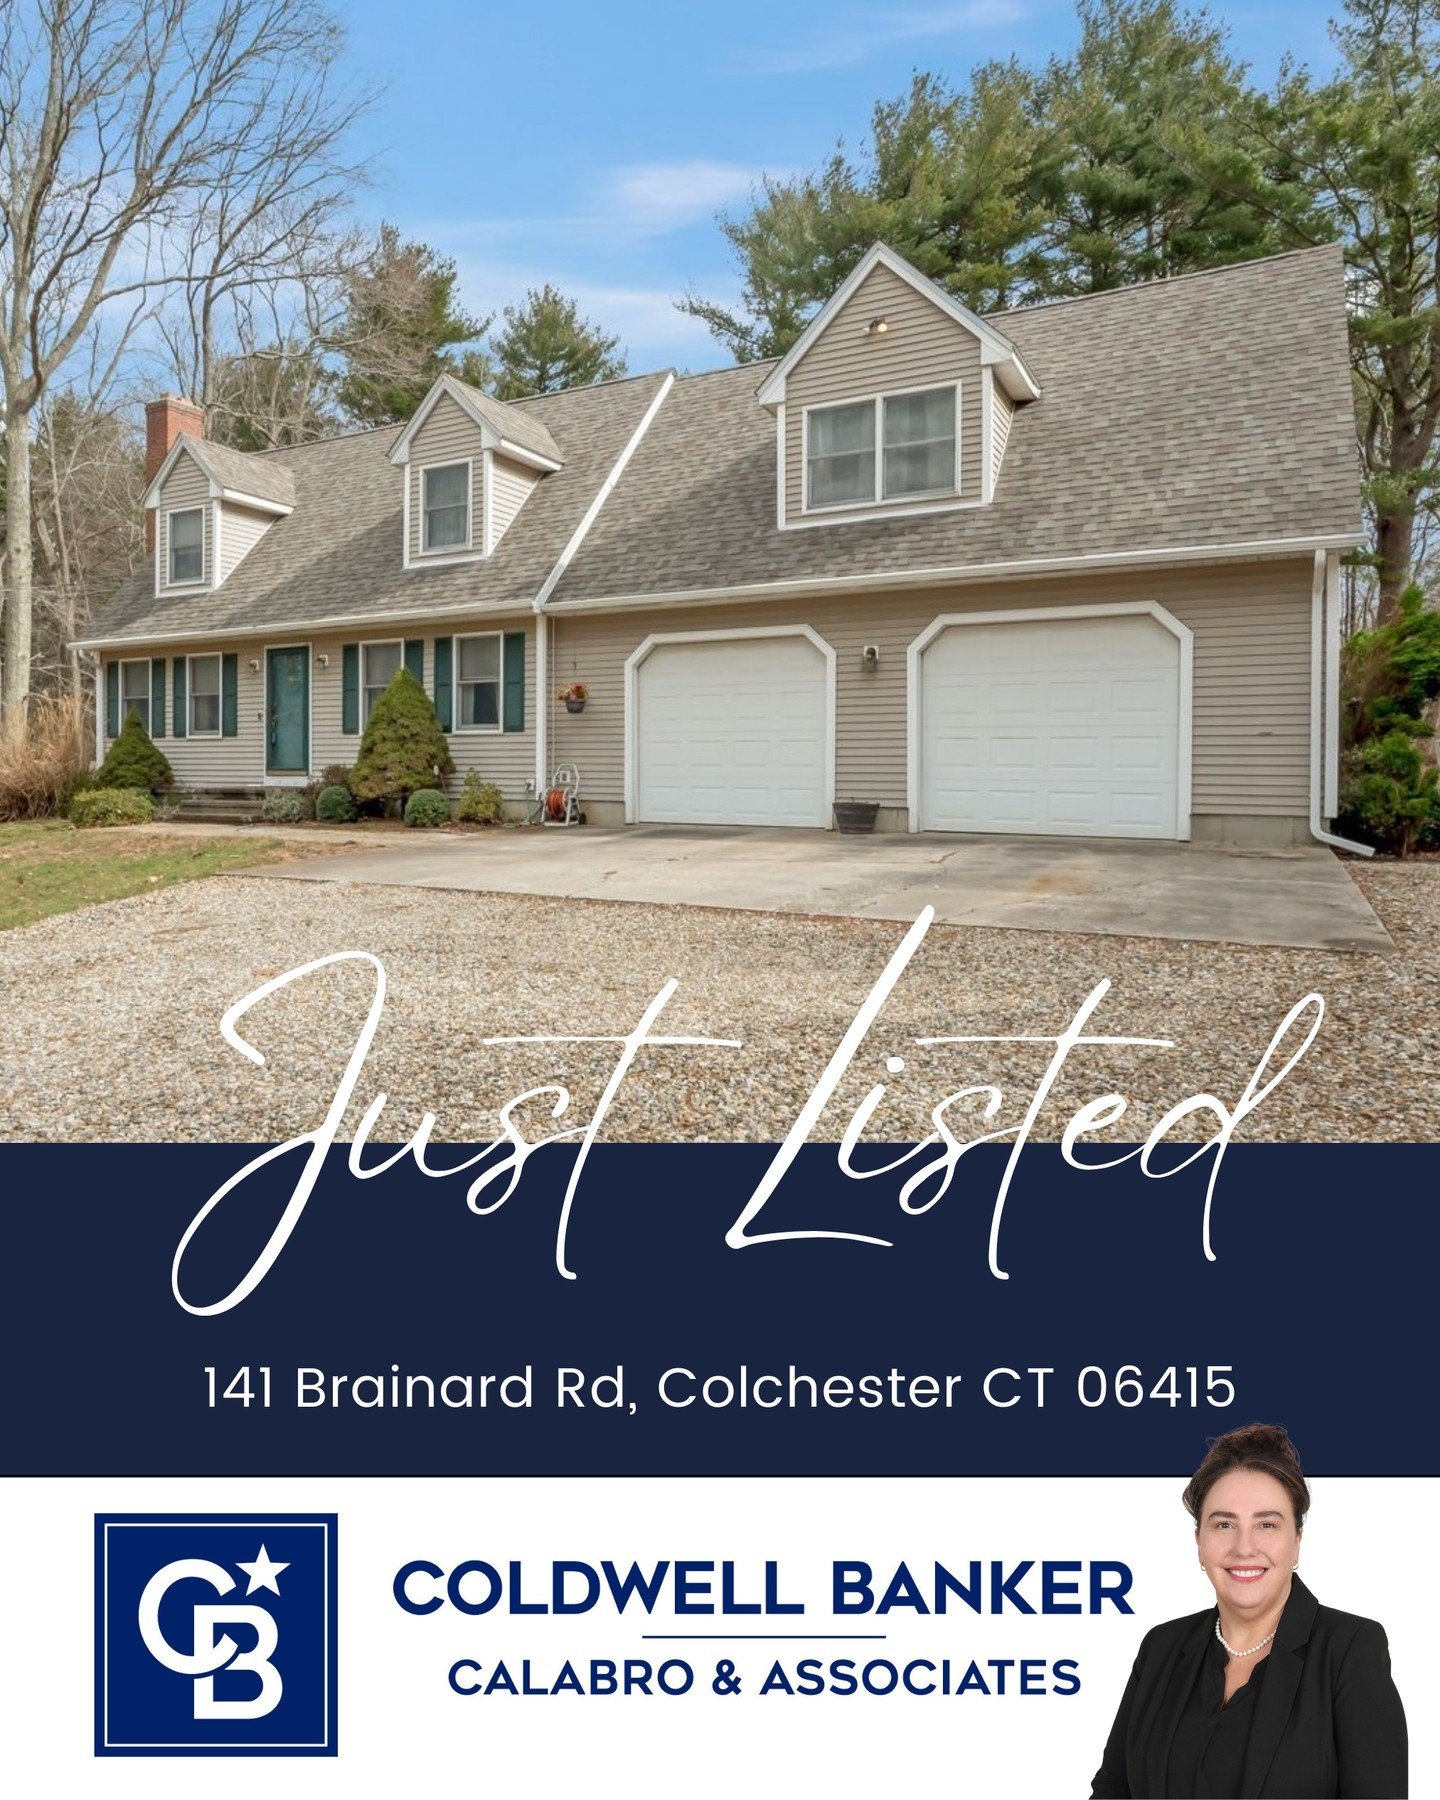 Barbara has a new listing at 141 Brainard Rd, Colchester CT 06415! This gorgeous home is priced at $399,900! 😍

Lovingly maintained, this updated 3-bedroom, 2.5-bath country Cape is move-in ready! This home sits on one-and-a-half wooded acres in a q